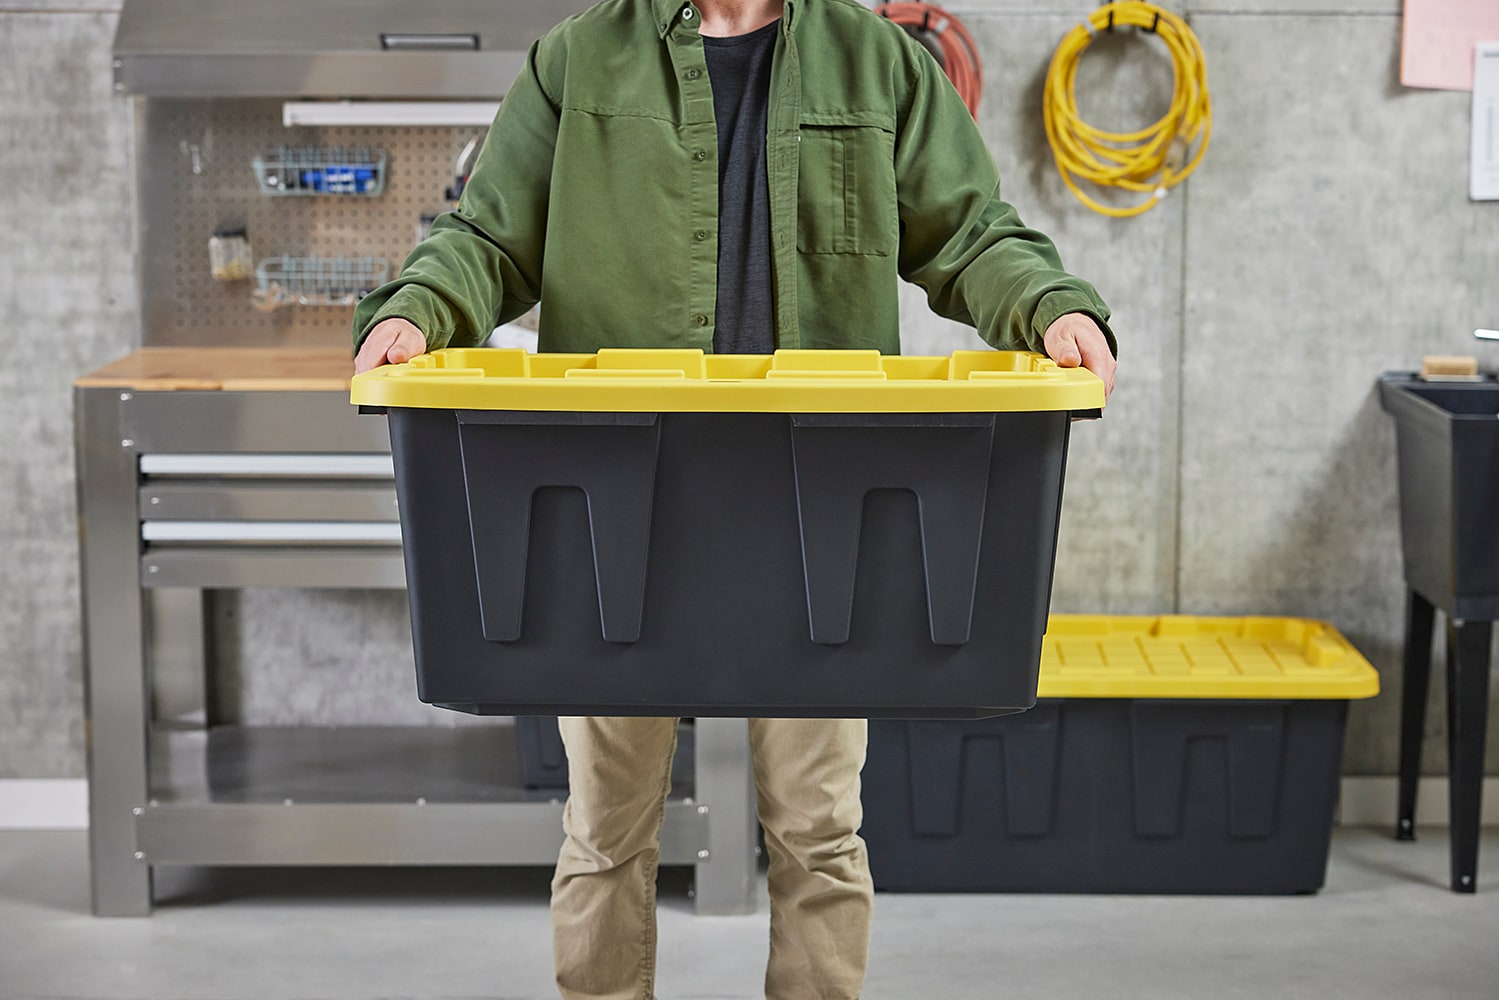 Commander 27-Gallon Storage Totes, $8.98 at Lowe's